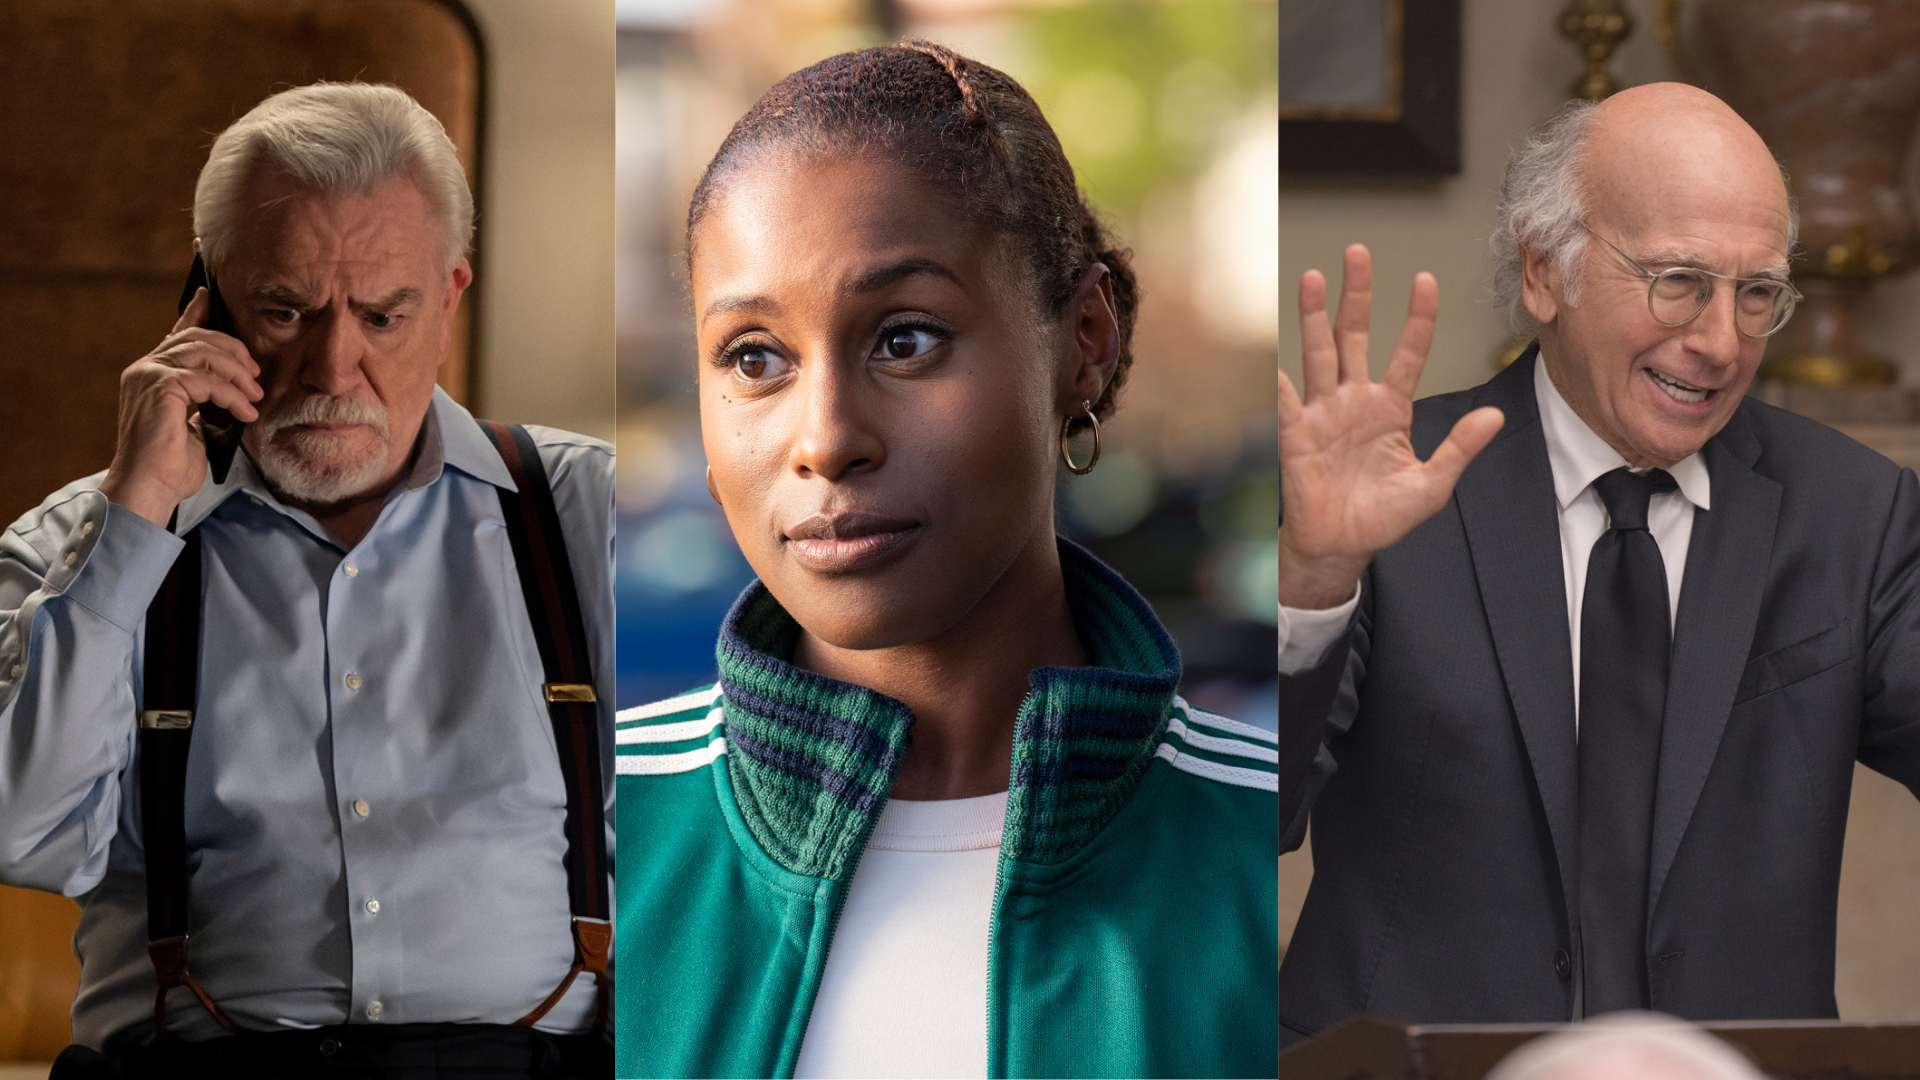 HBO dominates Sunday nights with Insecure, Curb Your Enthusiasm, and Succession